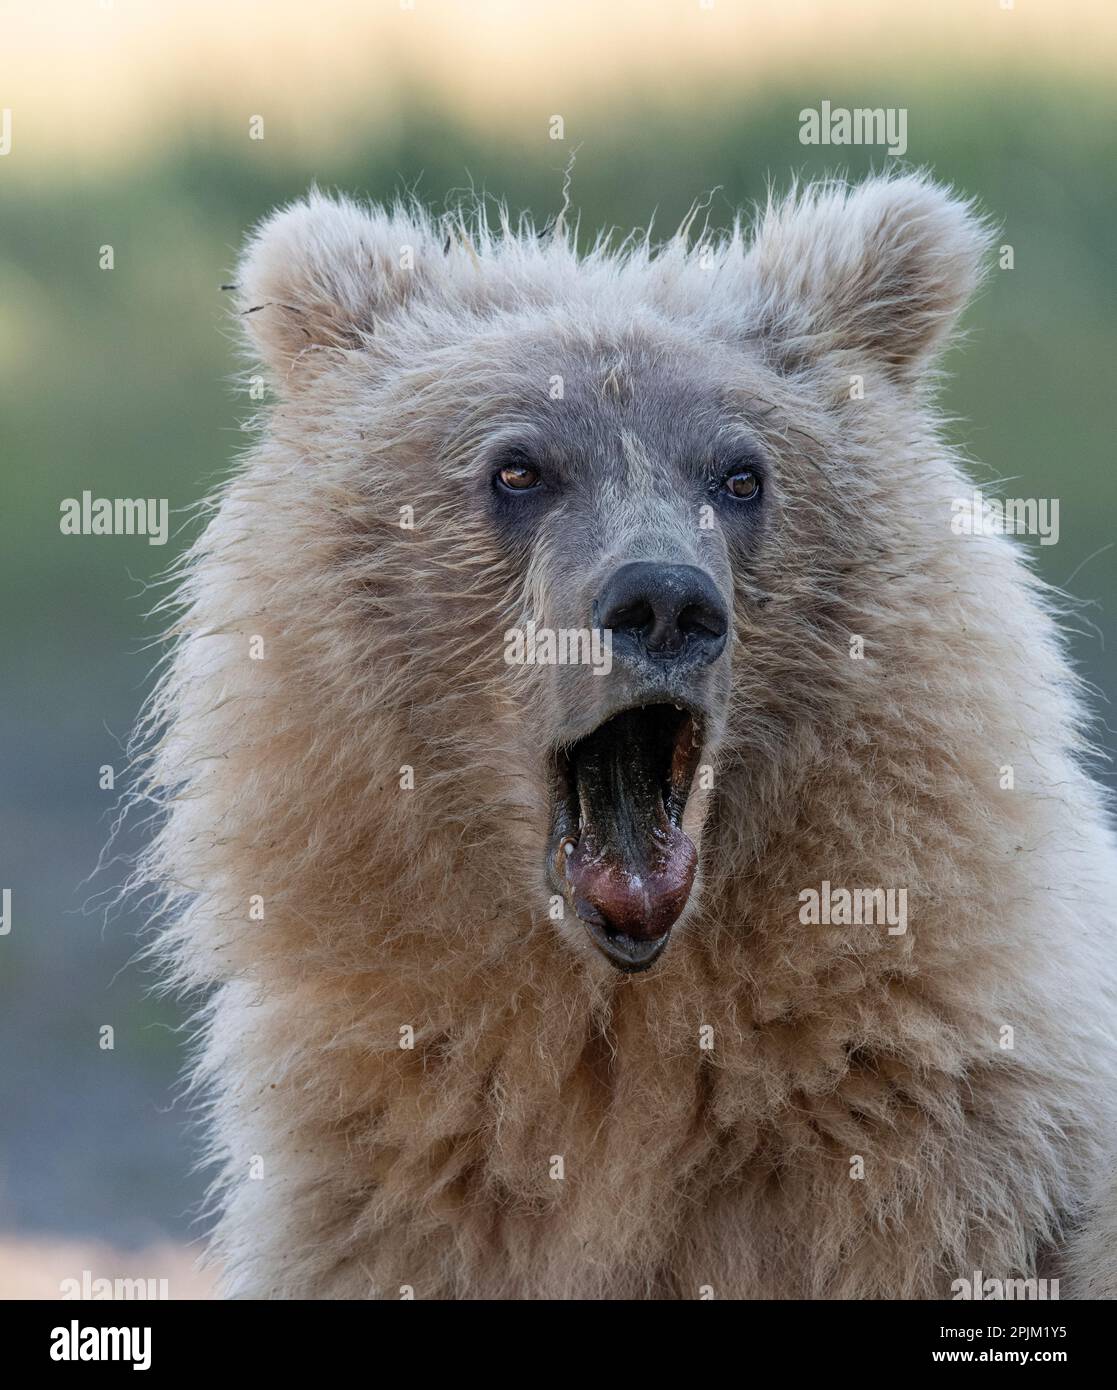 Brown bear cub sticking out its tongue. Stock Photo